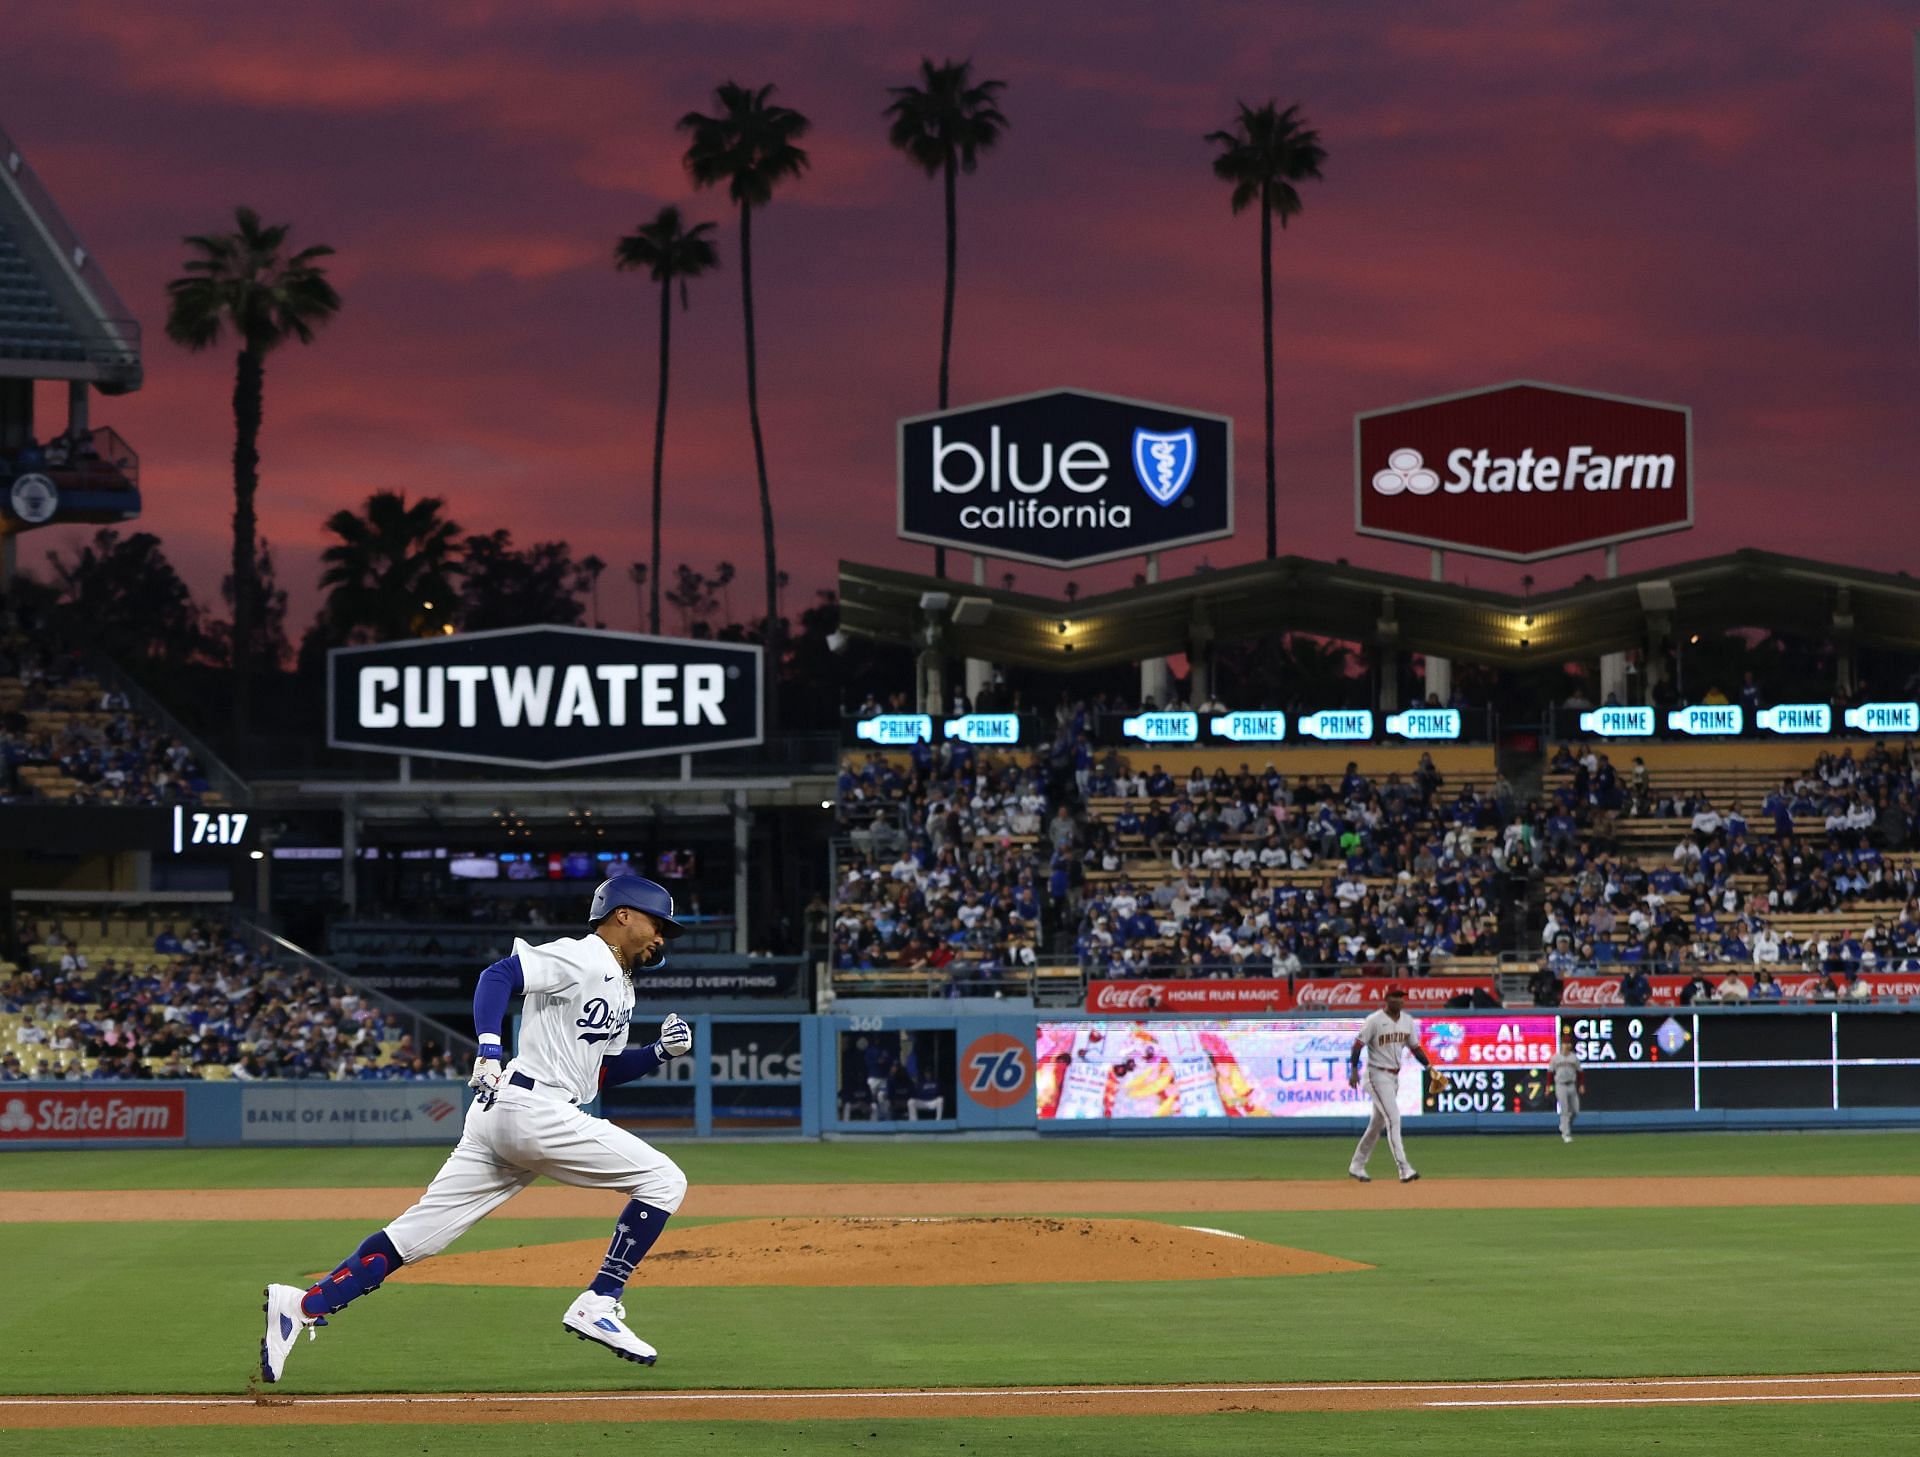 The Greatest Non-Baseball Events in Dodger Stadium History